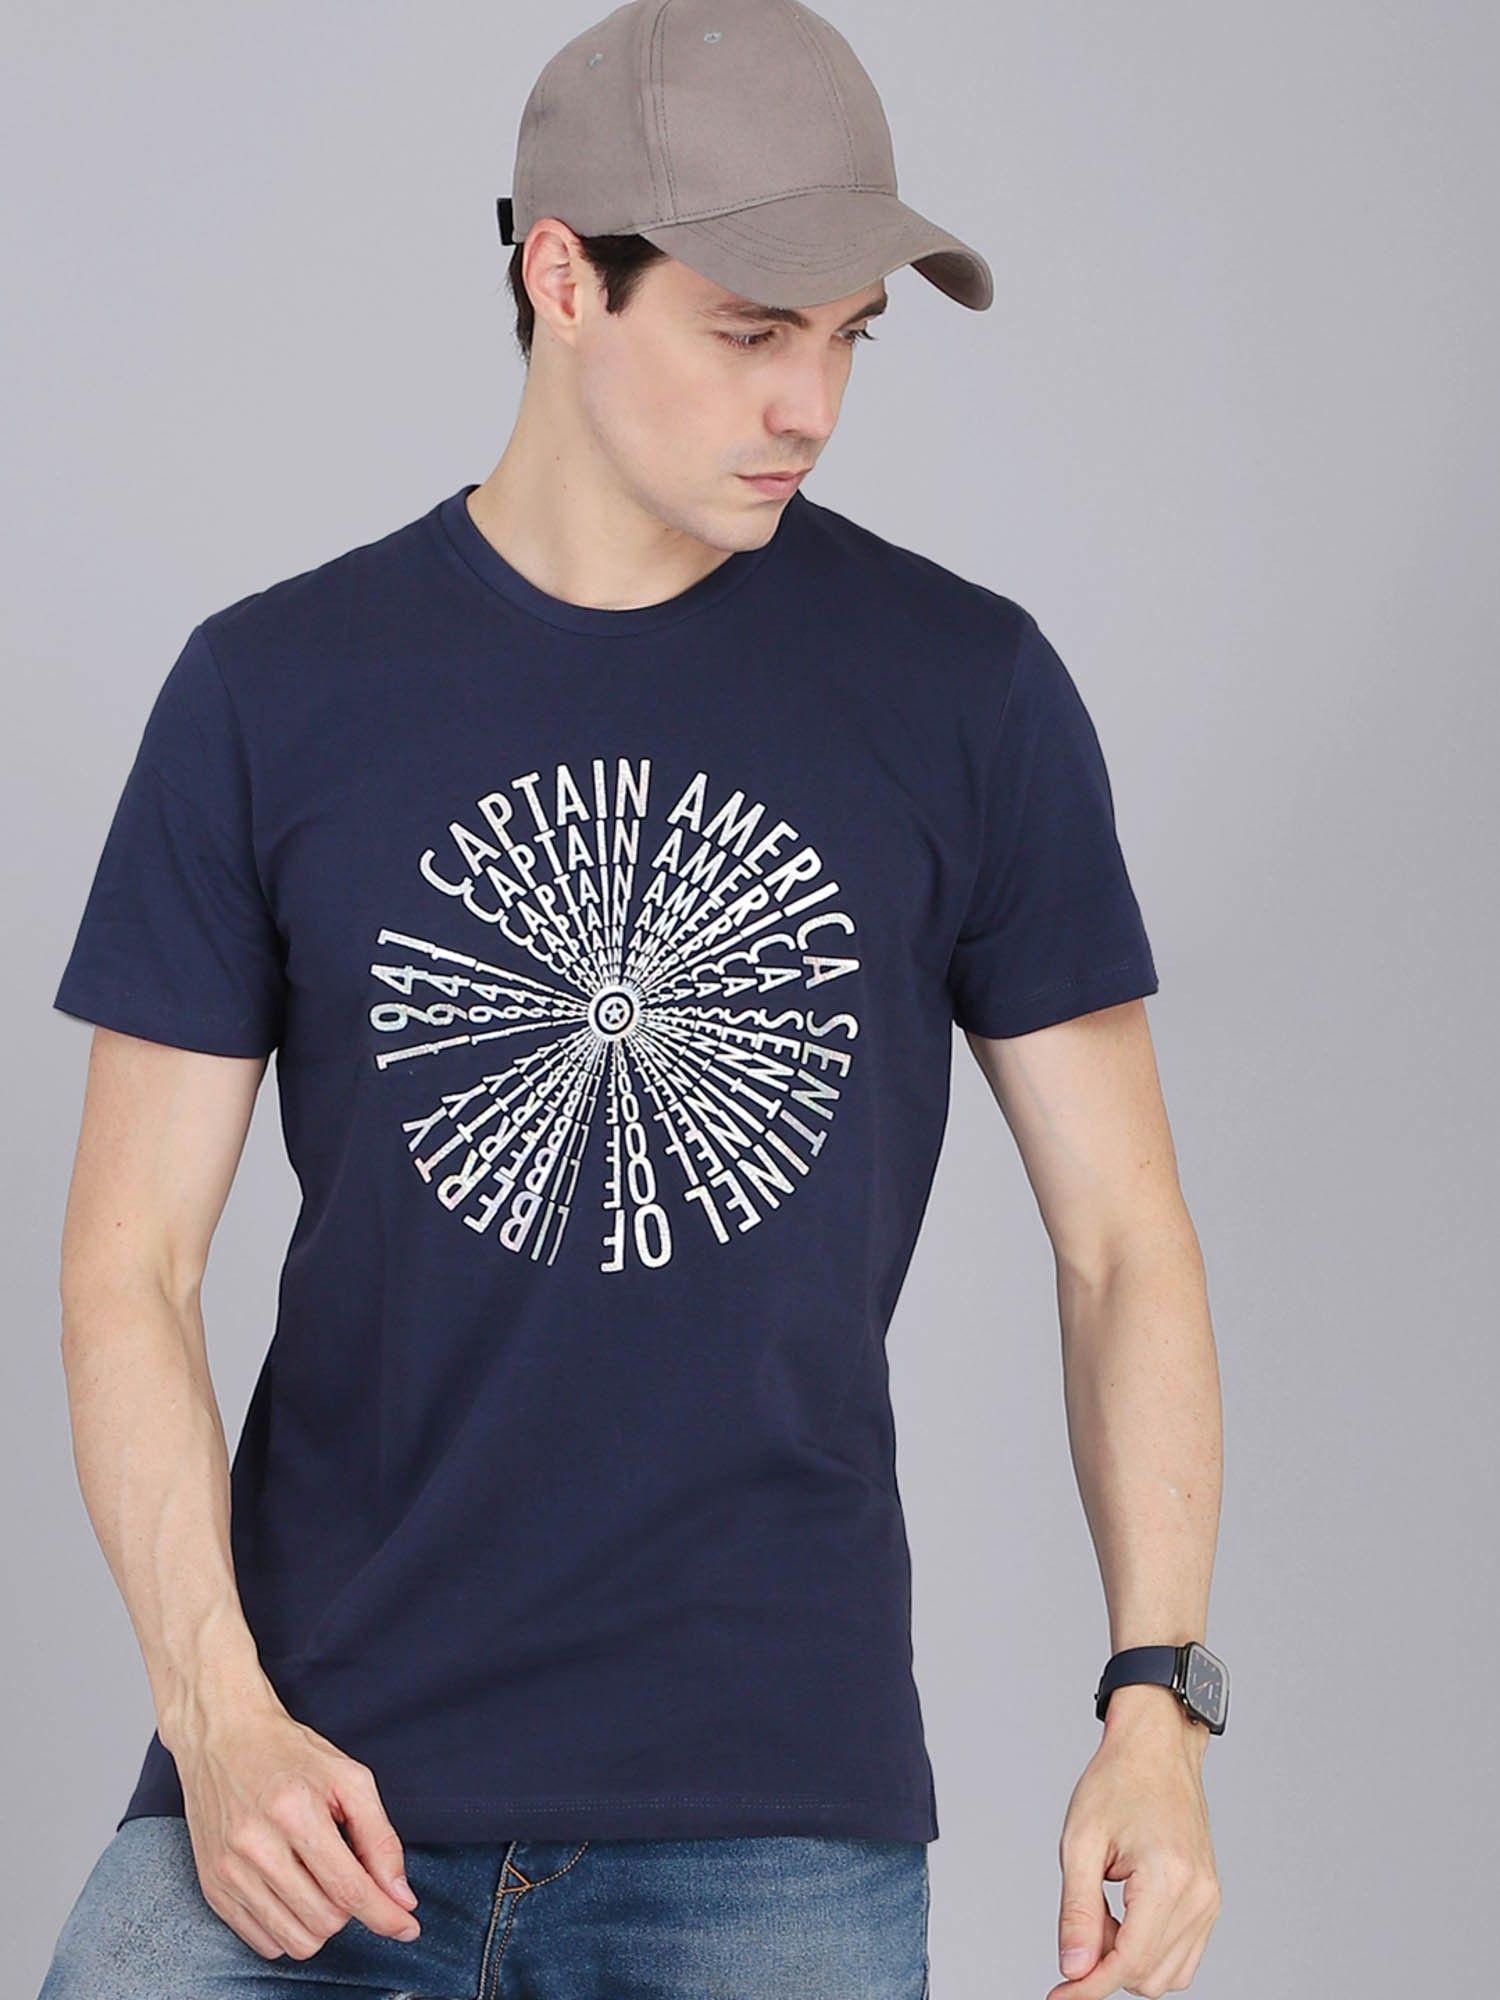 captain-america-featured-t-shirt-for-men